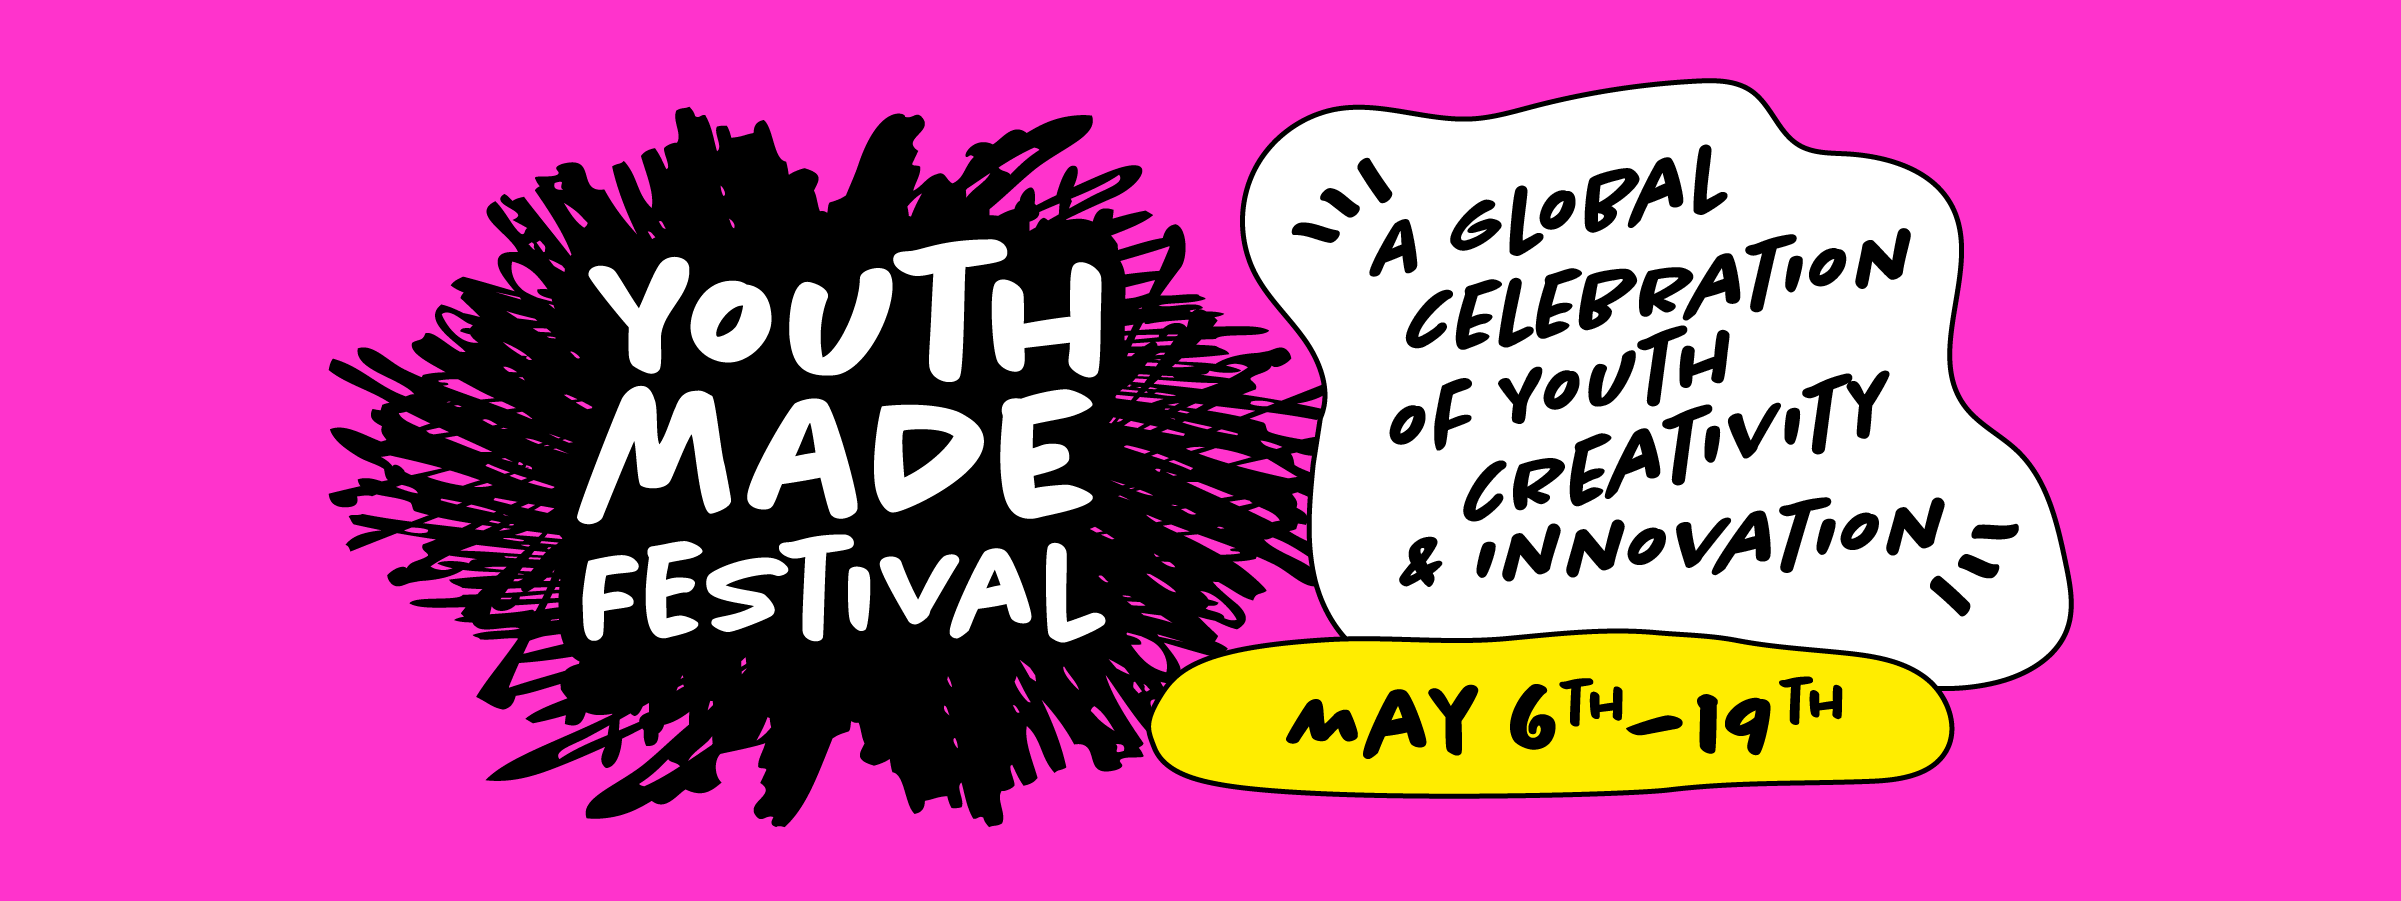 YouthMADE Festival is a global celebration of youth creativity and innovation form May 6-19, 2024.